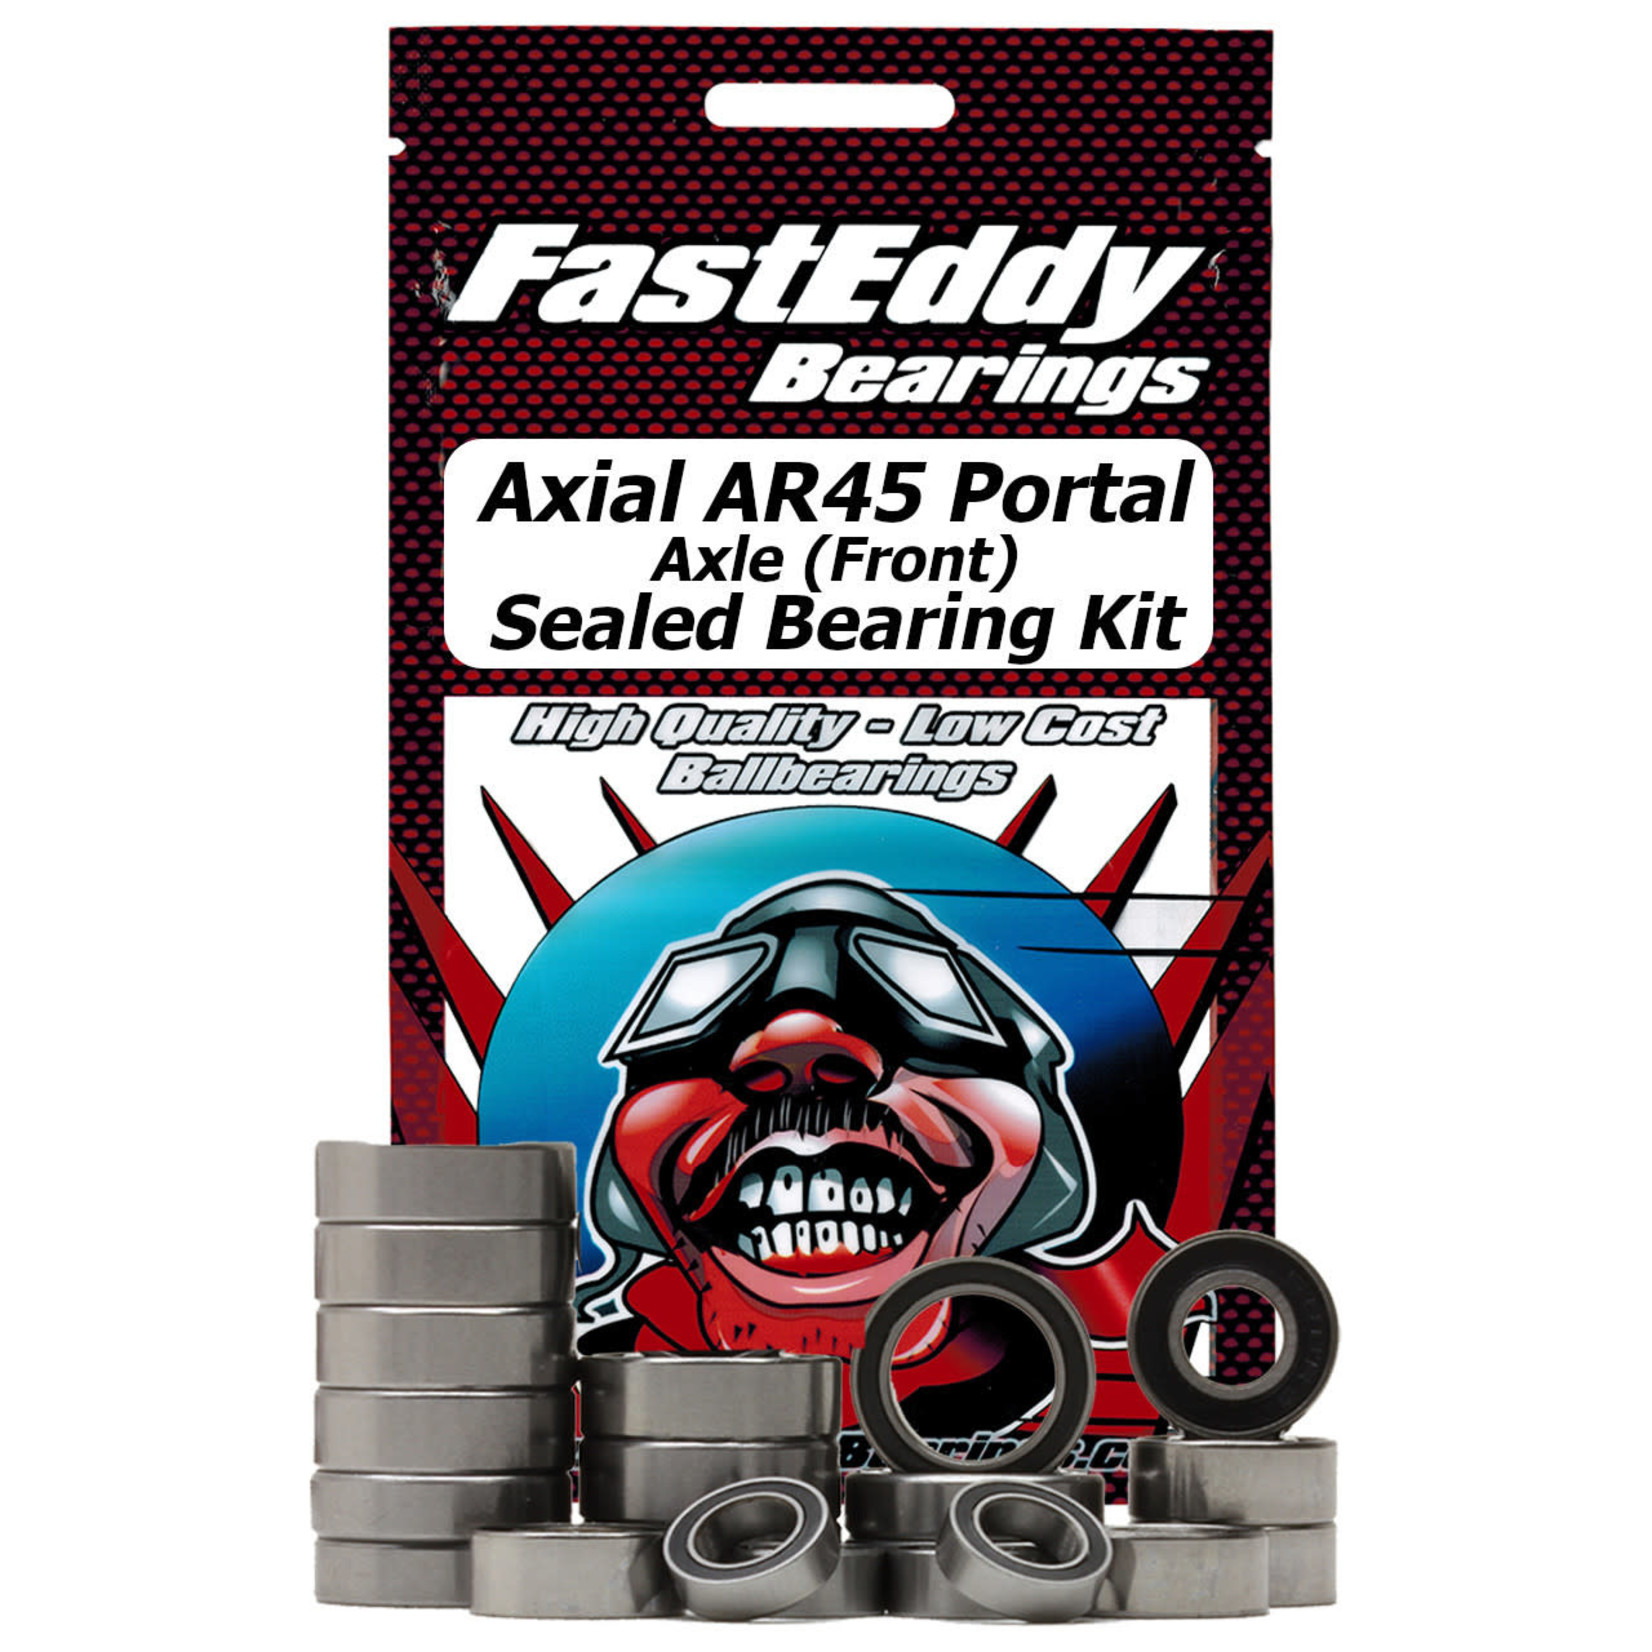 FastEddy FastEddy Bearings Axial AR45 Portal Axle (Front) Sealed Bearing Kit #TFE6063